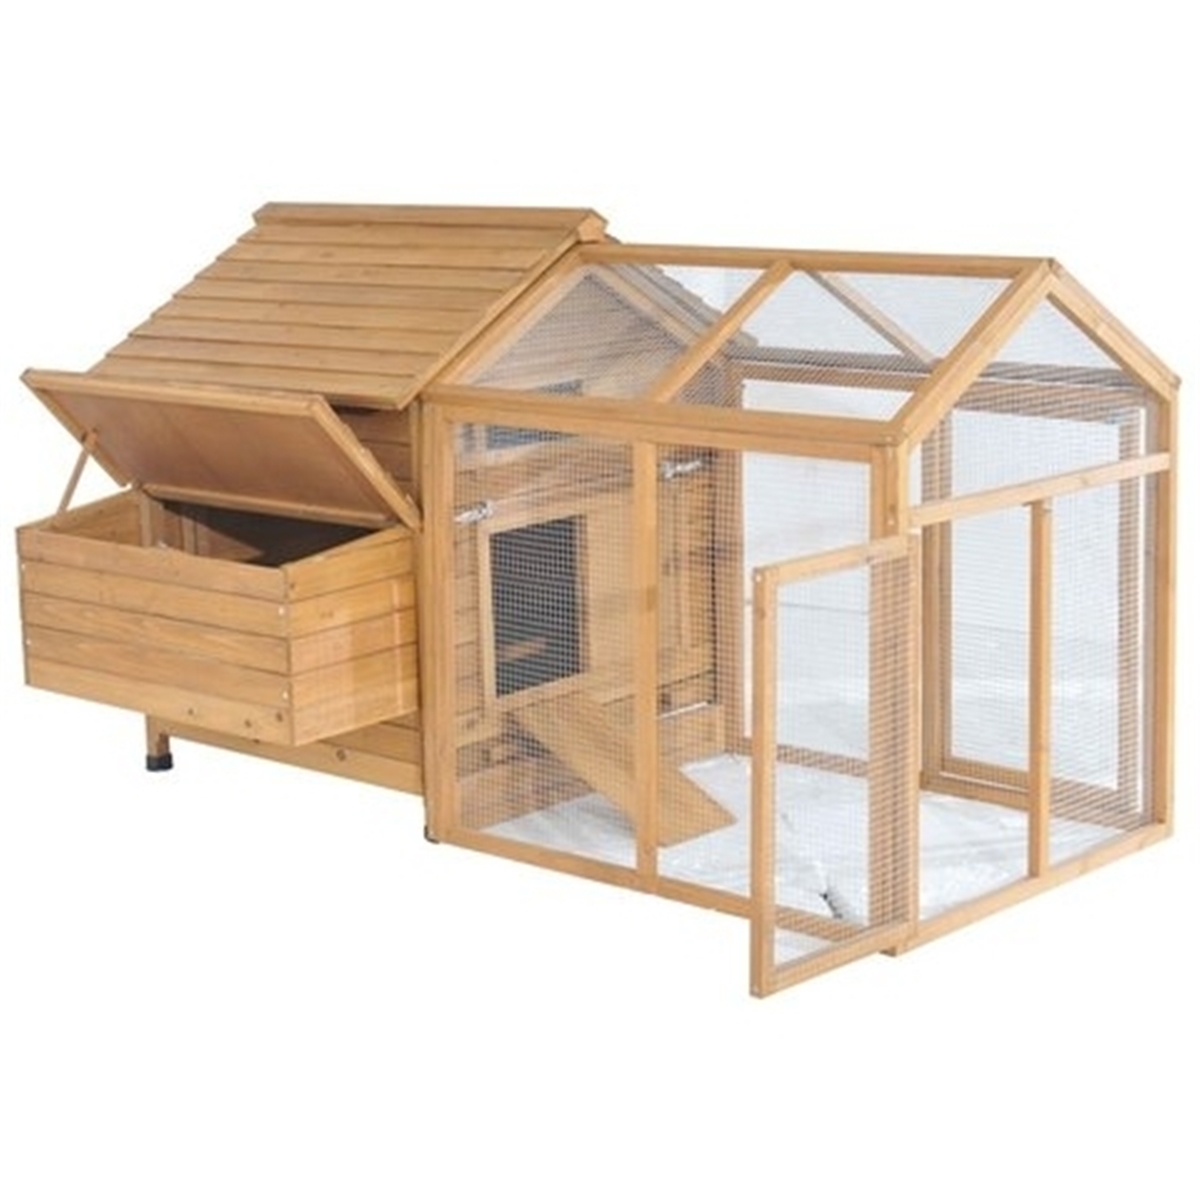 Lim yang: Chapter Chicken coops sale northern ireland